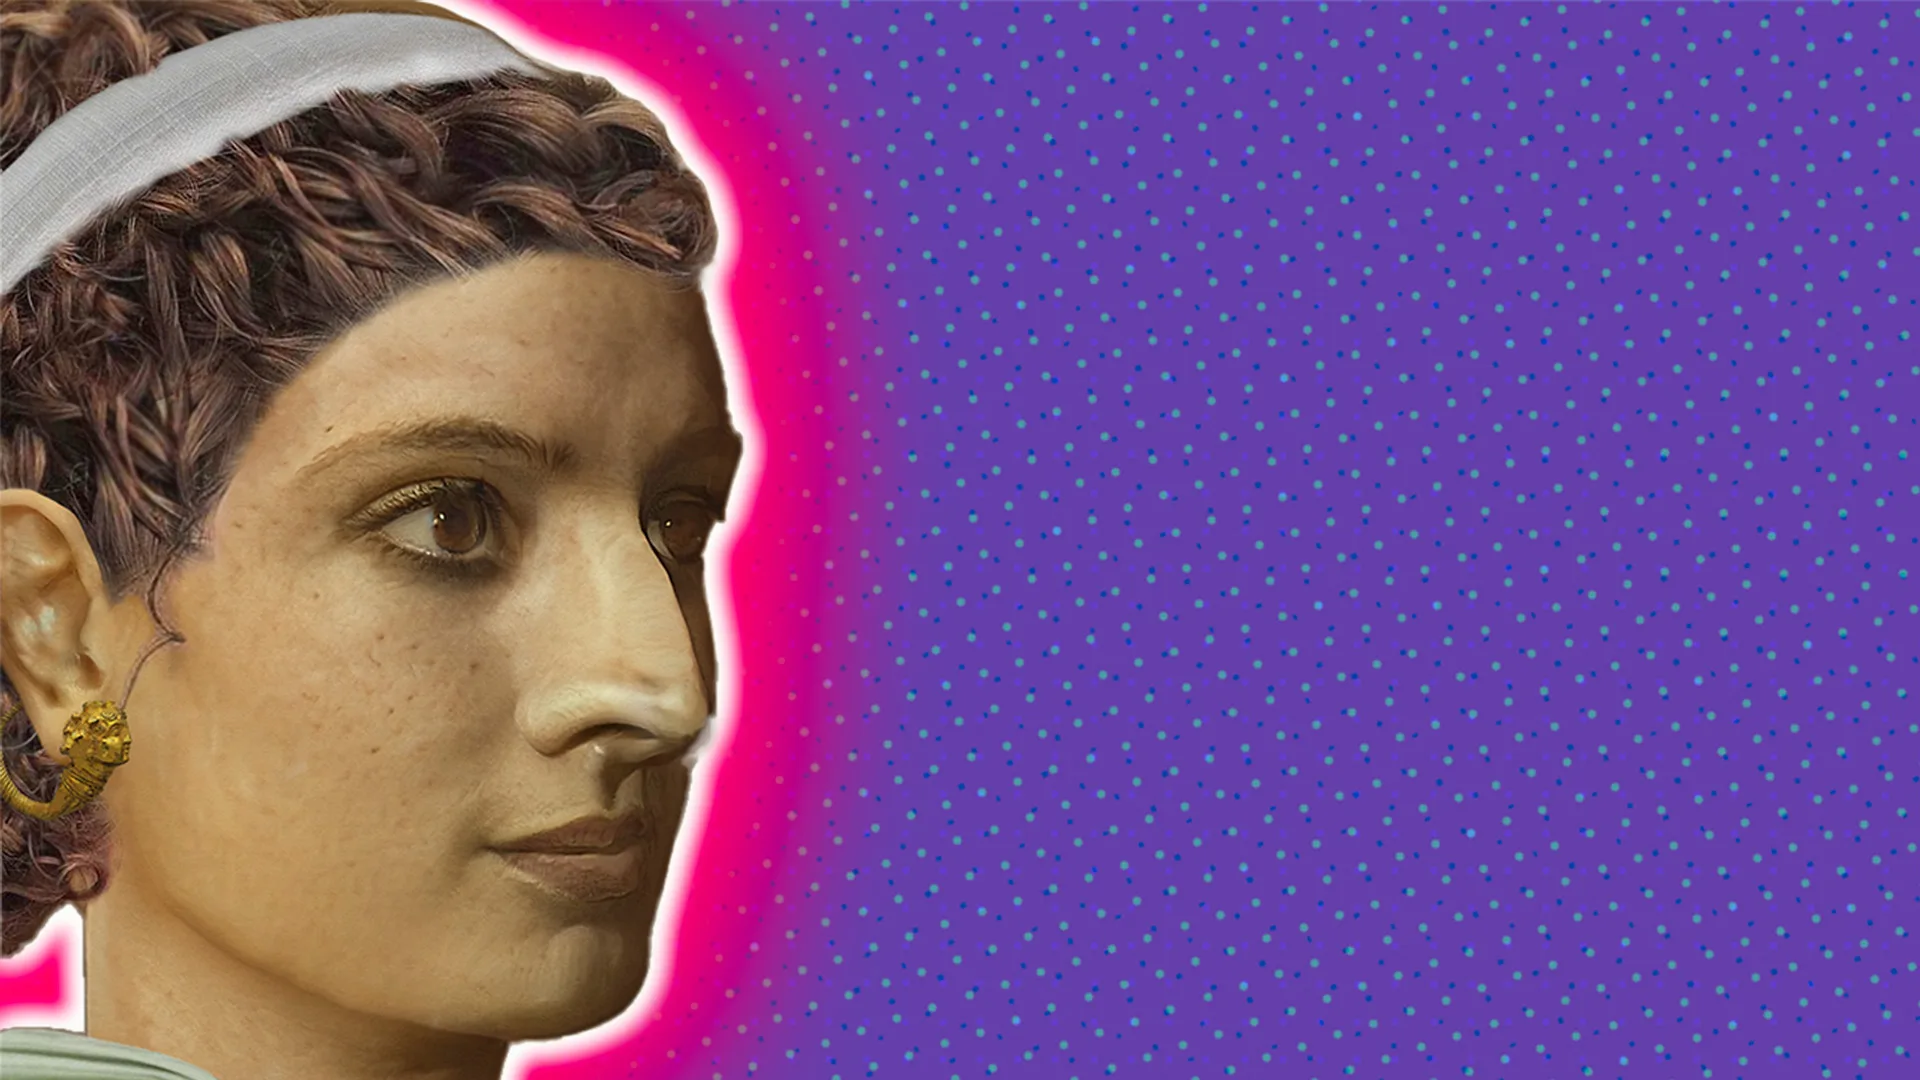 A reconstruction of Cleopatra's face with a polkadot background and a glow around the image